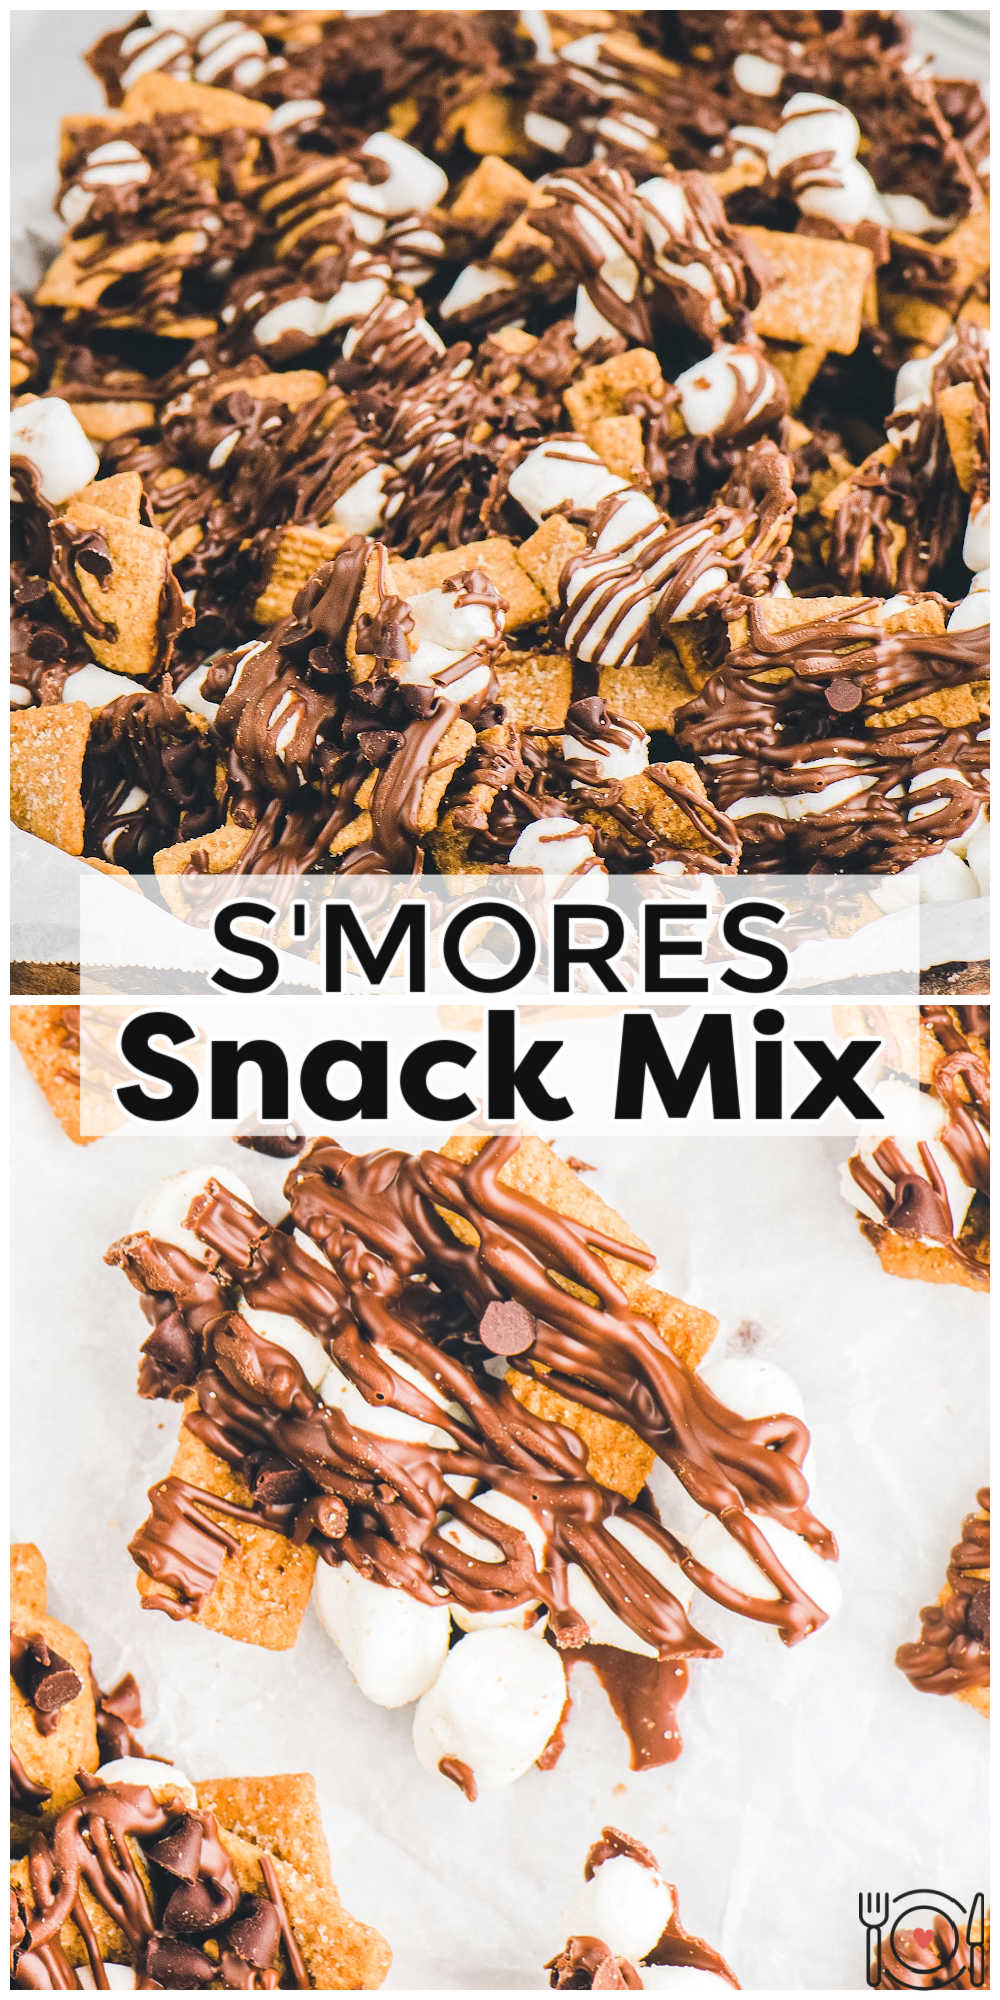 S'mores Snack Mix is delicious, easy to make, and irresistible. It combines graham cereal, melted milk chocolate bars, mini chocolate chips, and marshmallows. via @foodfolksandfun